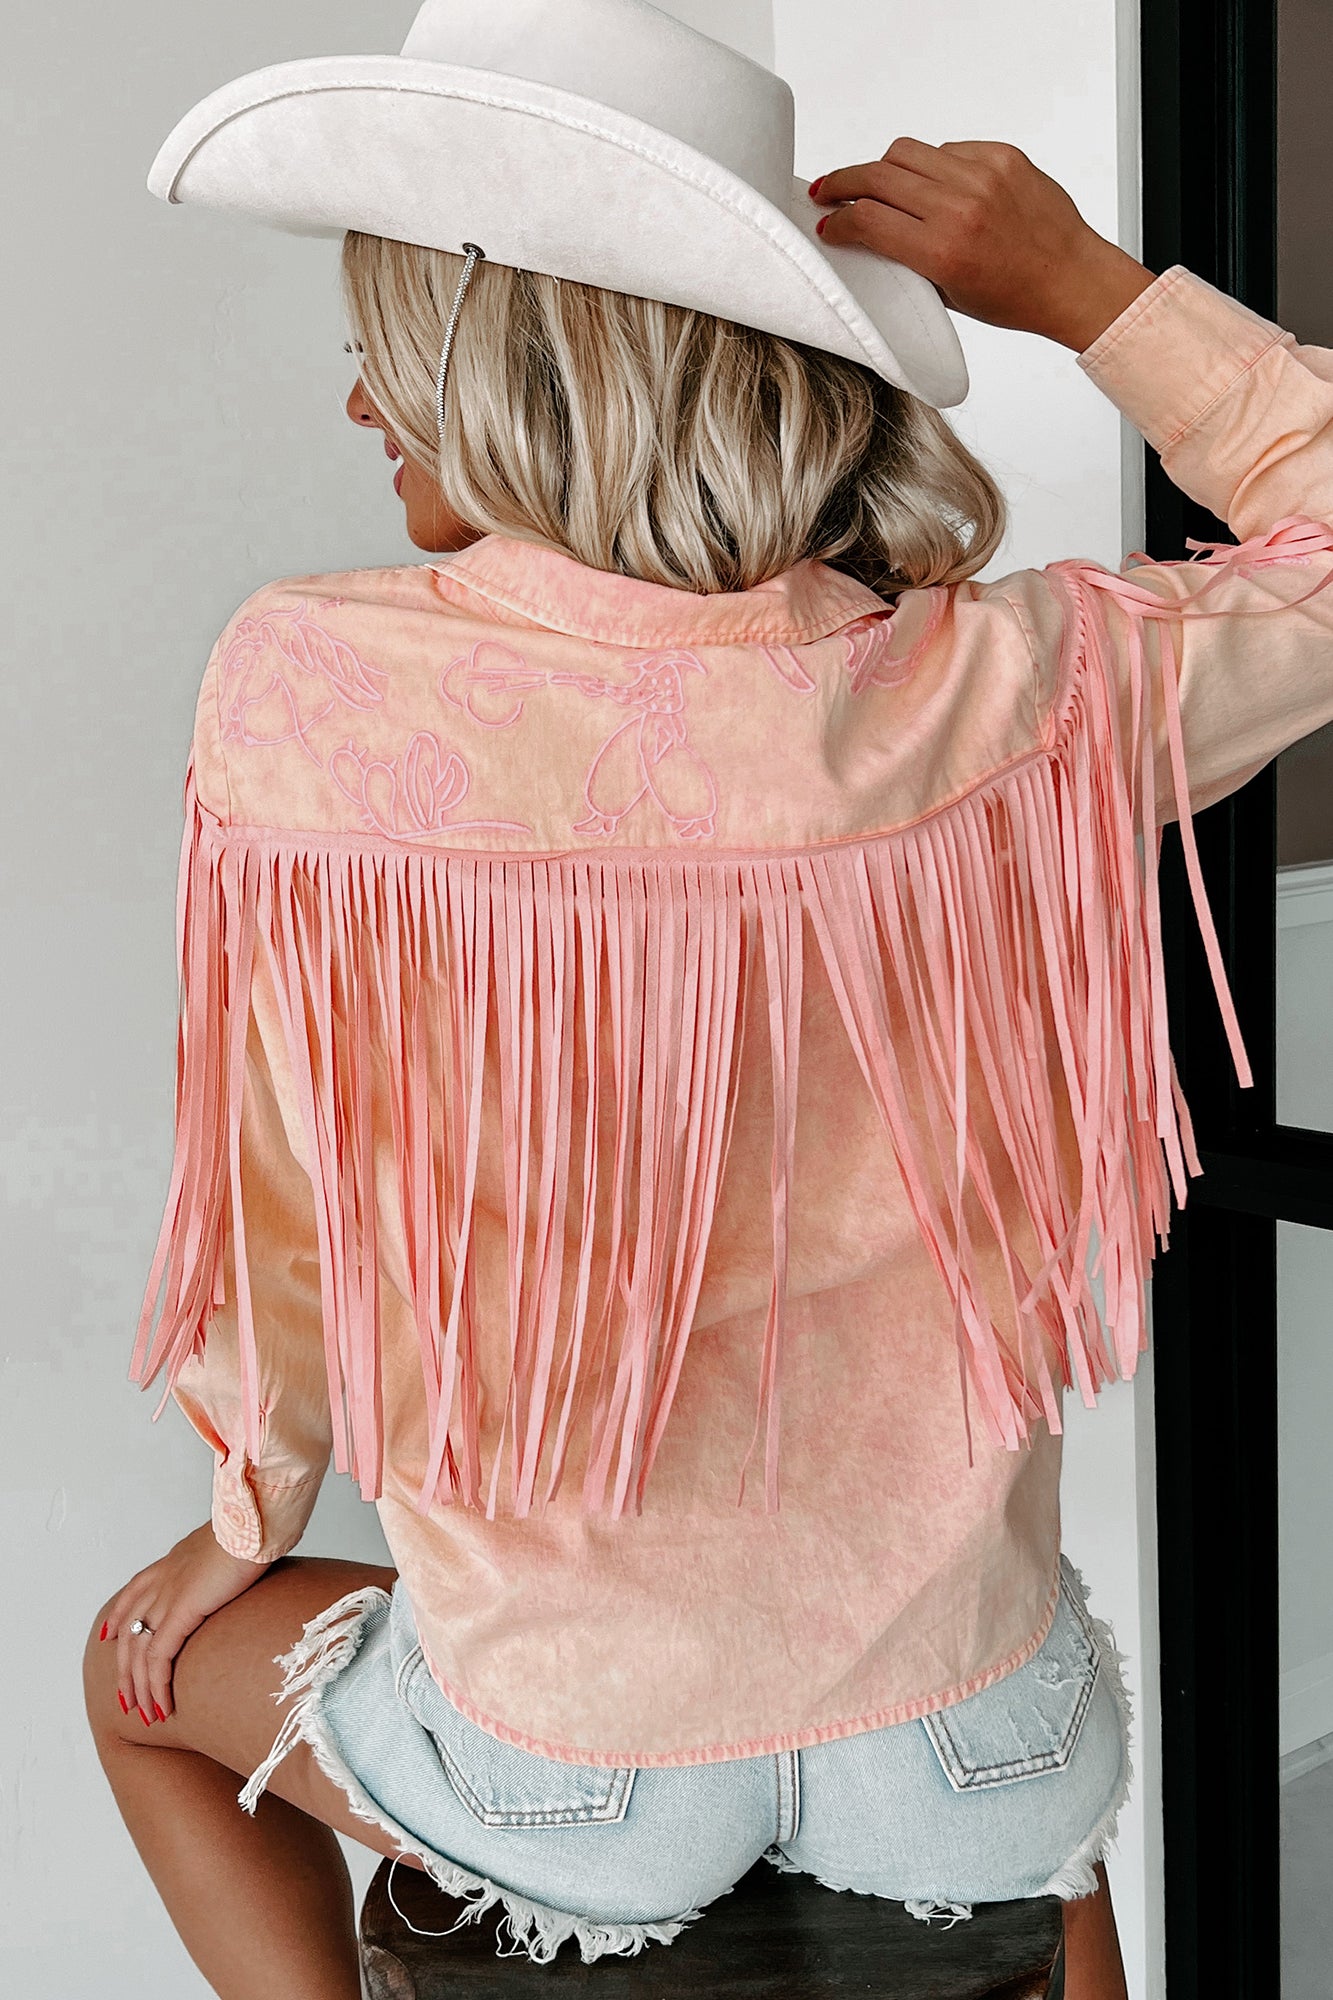 My Lucky Stars Embroidered Fringe Button-Down Shirt (Pink) - NanaMacs